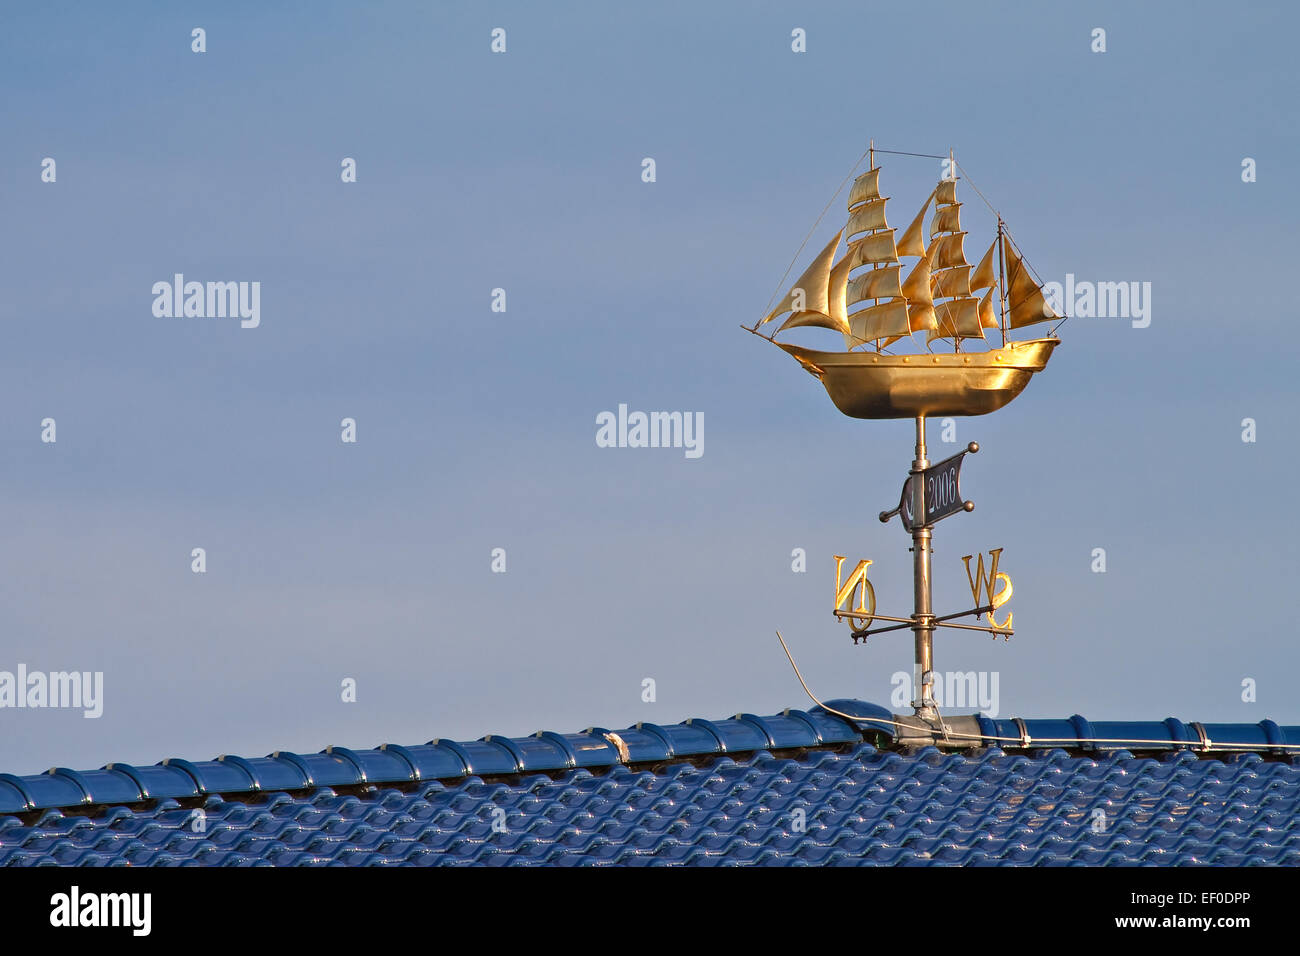 A sailing boat on the roof. Stock Photo